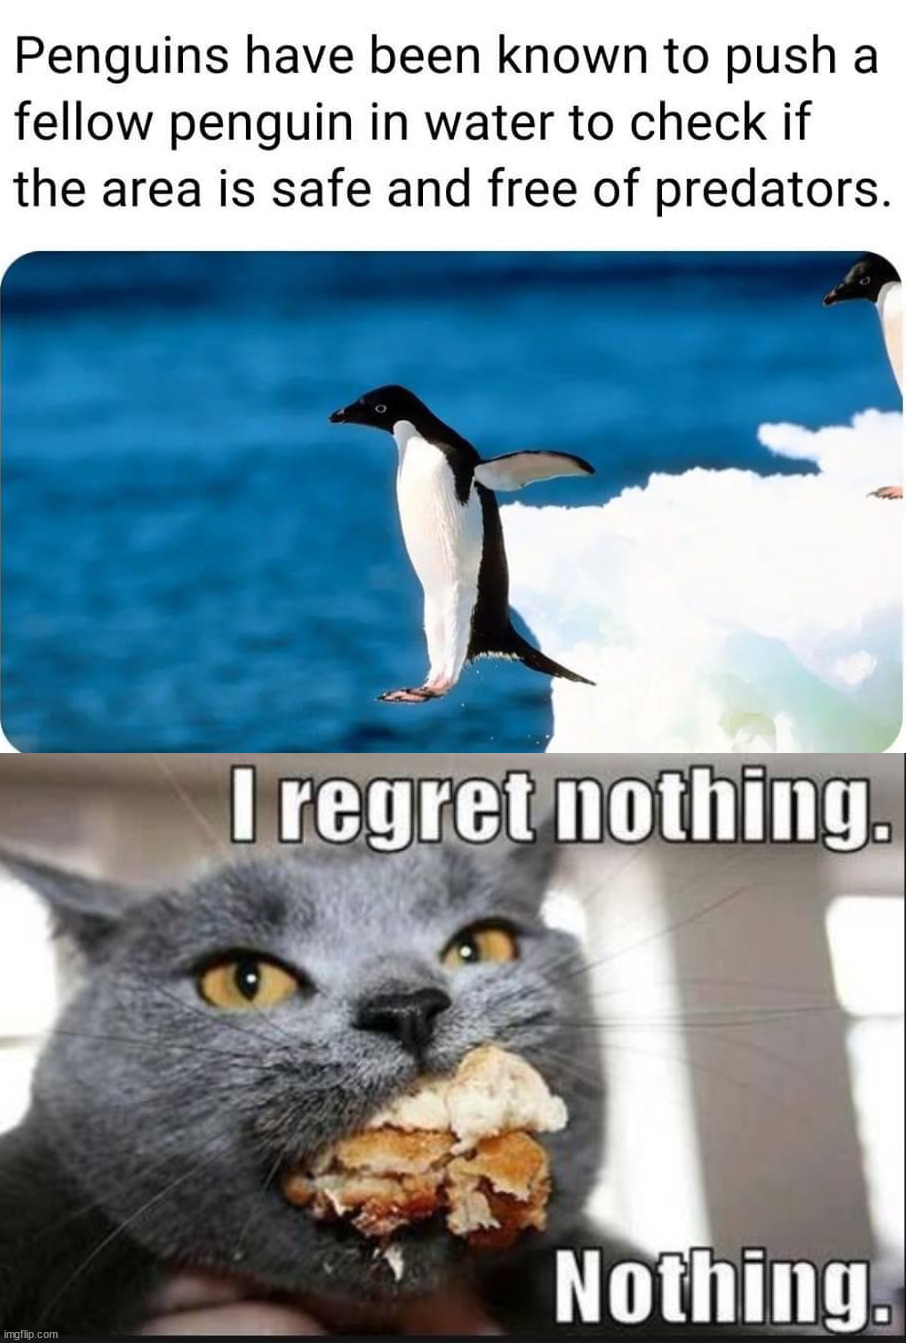 Penguins are kind of mean | image tagged in i regret nothing,penguin,pushing,killer whale | made w/ Imgflip meme maker